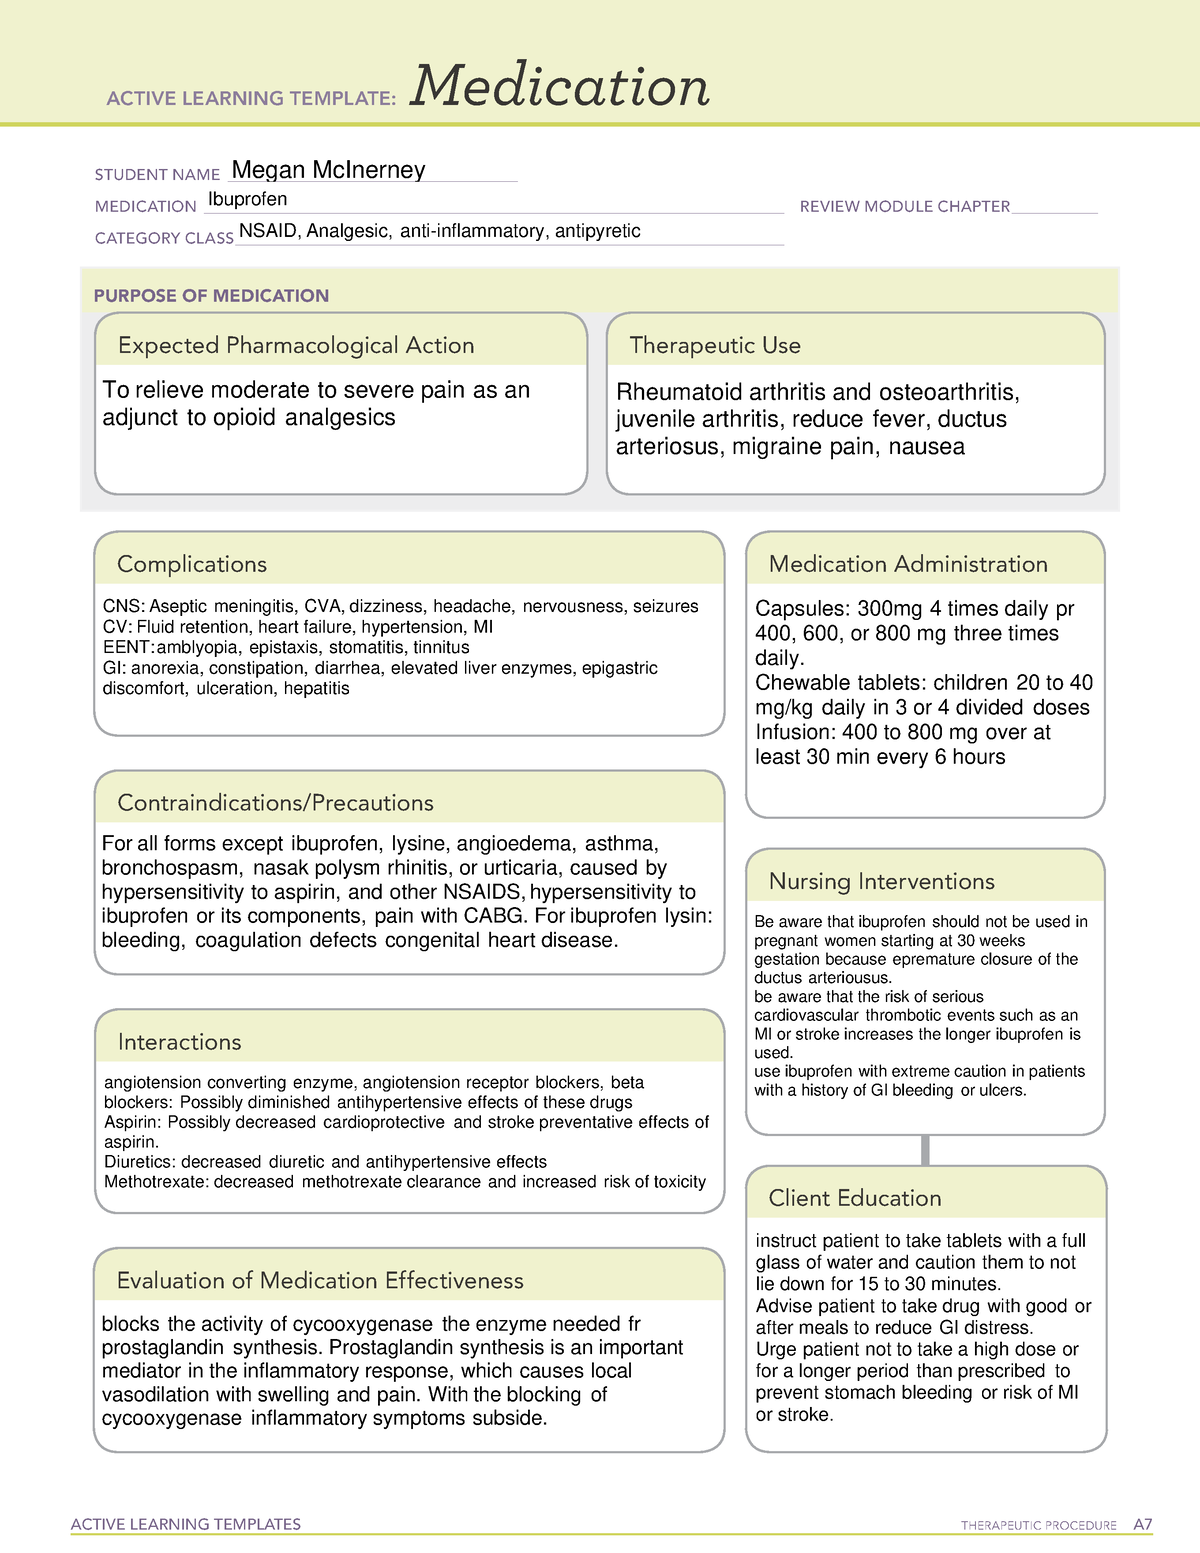 Ibuprofen medication ACTIVE LEARNING TEMPLATES THERAPEUTIC